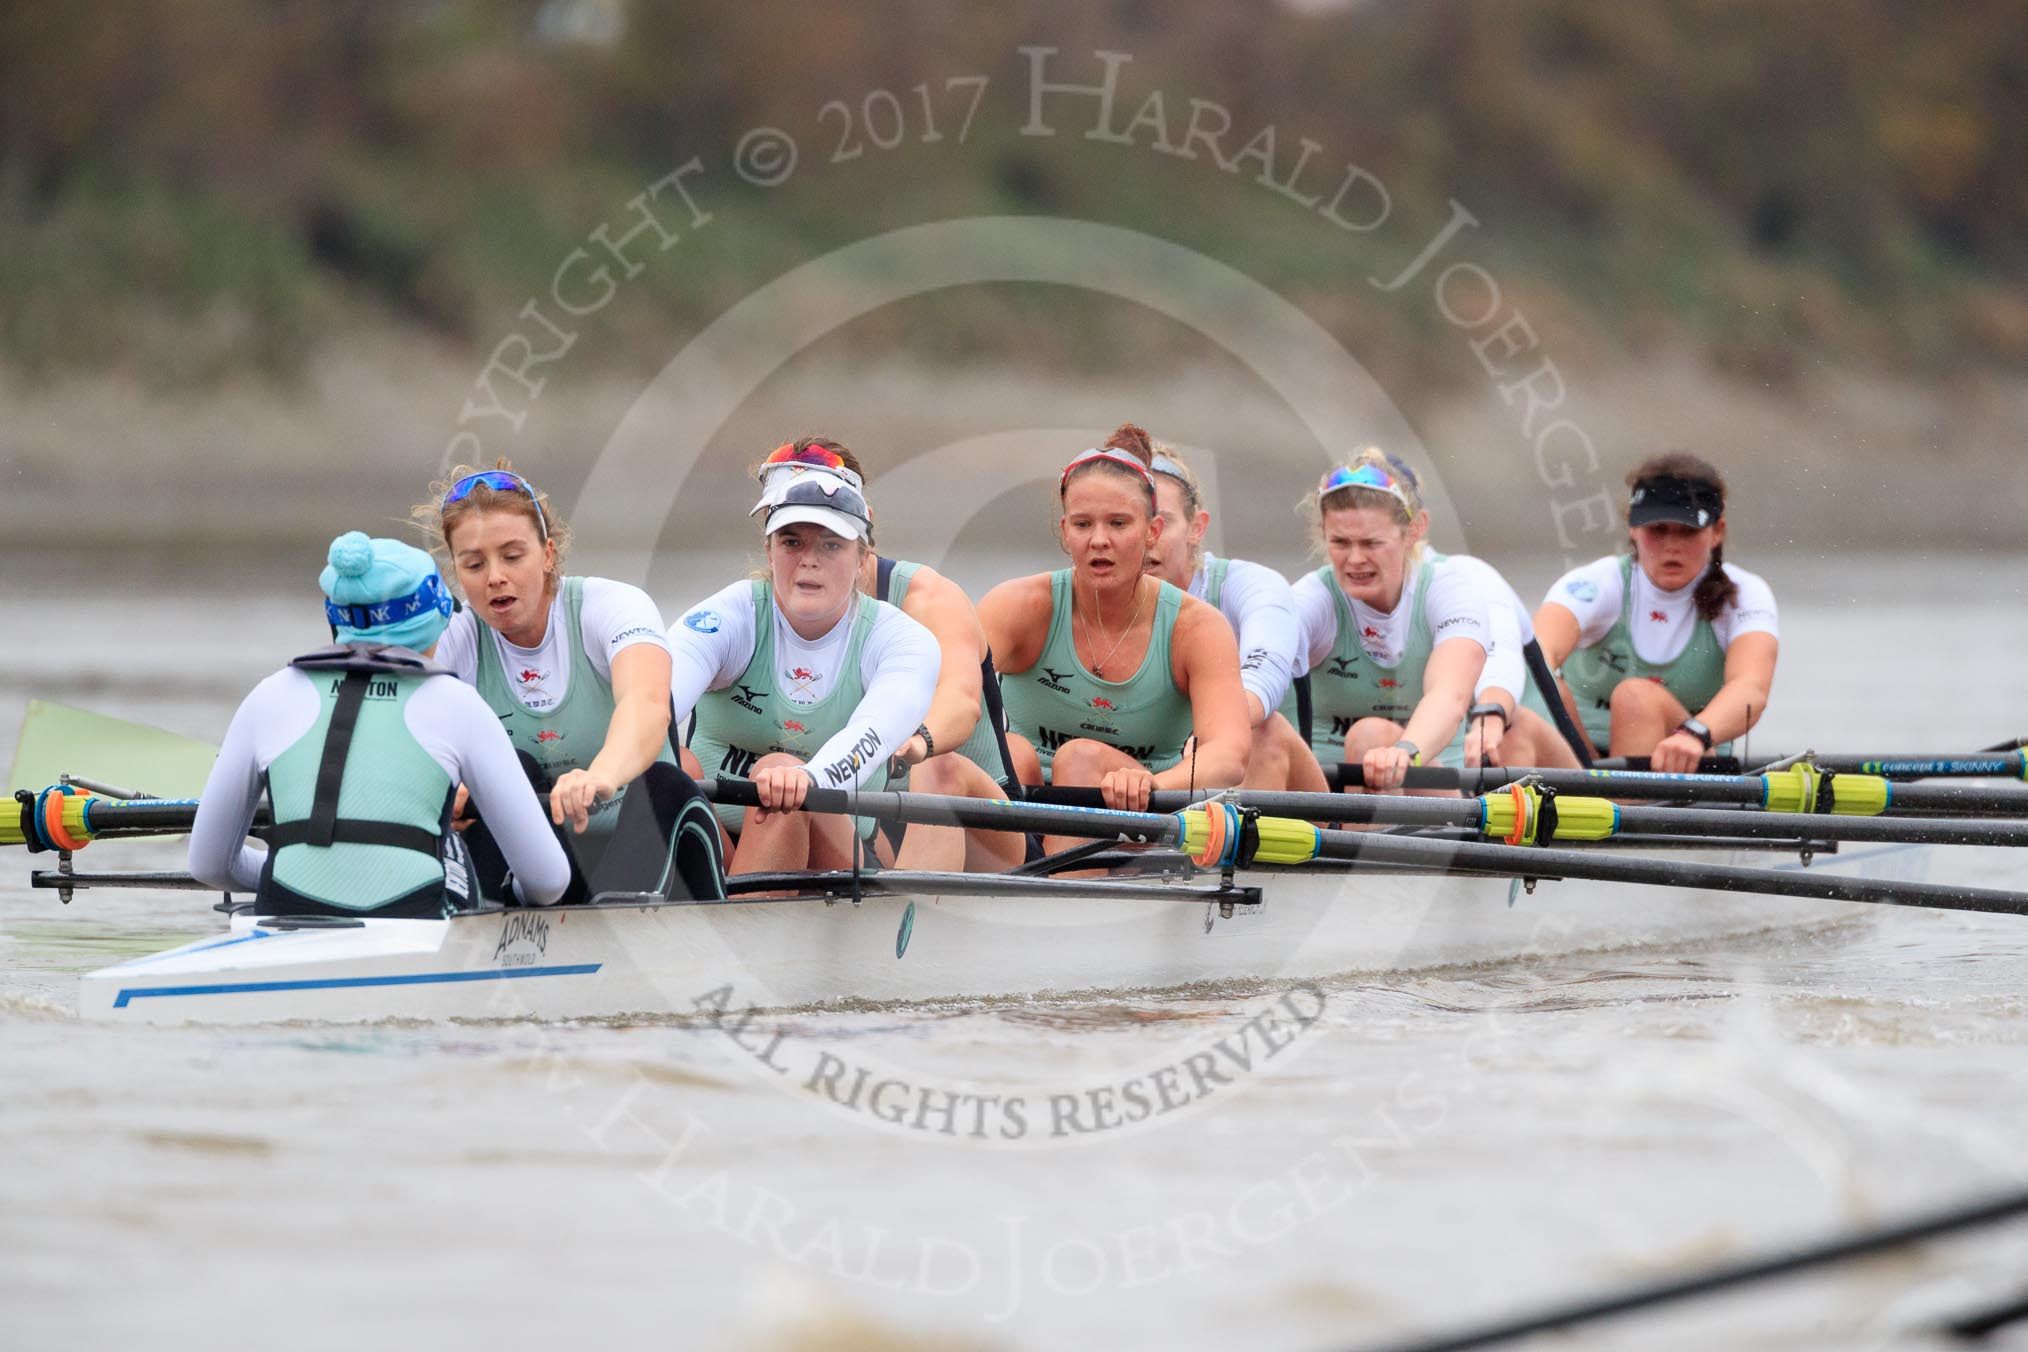 The Boat Race season 2018 - Women's Boat Race Trial Eights (CUWBC, Cambridge): Expecto Patronum:  Cox-Sophie Shapter, stroke-Alice White,  7-Abigail Parker, 6-Thea Zabell, 5-Kelsey Barolak, 4-Laura Foster, 3-Sally O Brien, 2-Millie Perrin, bow-Eve Caroe.
River Thames between Putney Bridge and Mortlake,
London SW15,

United Kingdom,
on 05 December 2017 at 12:56, image #144